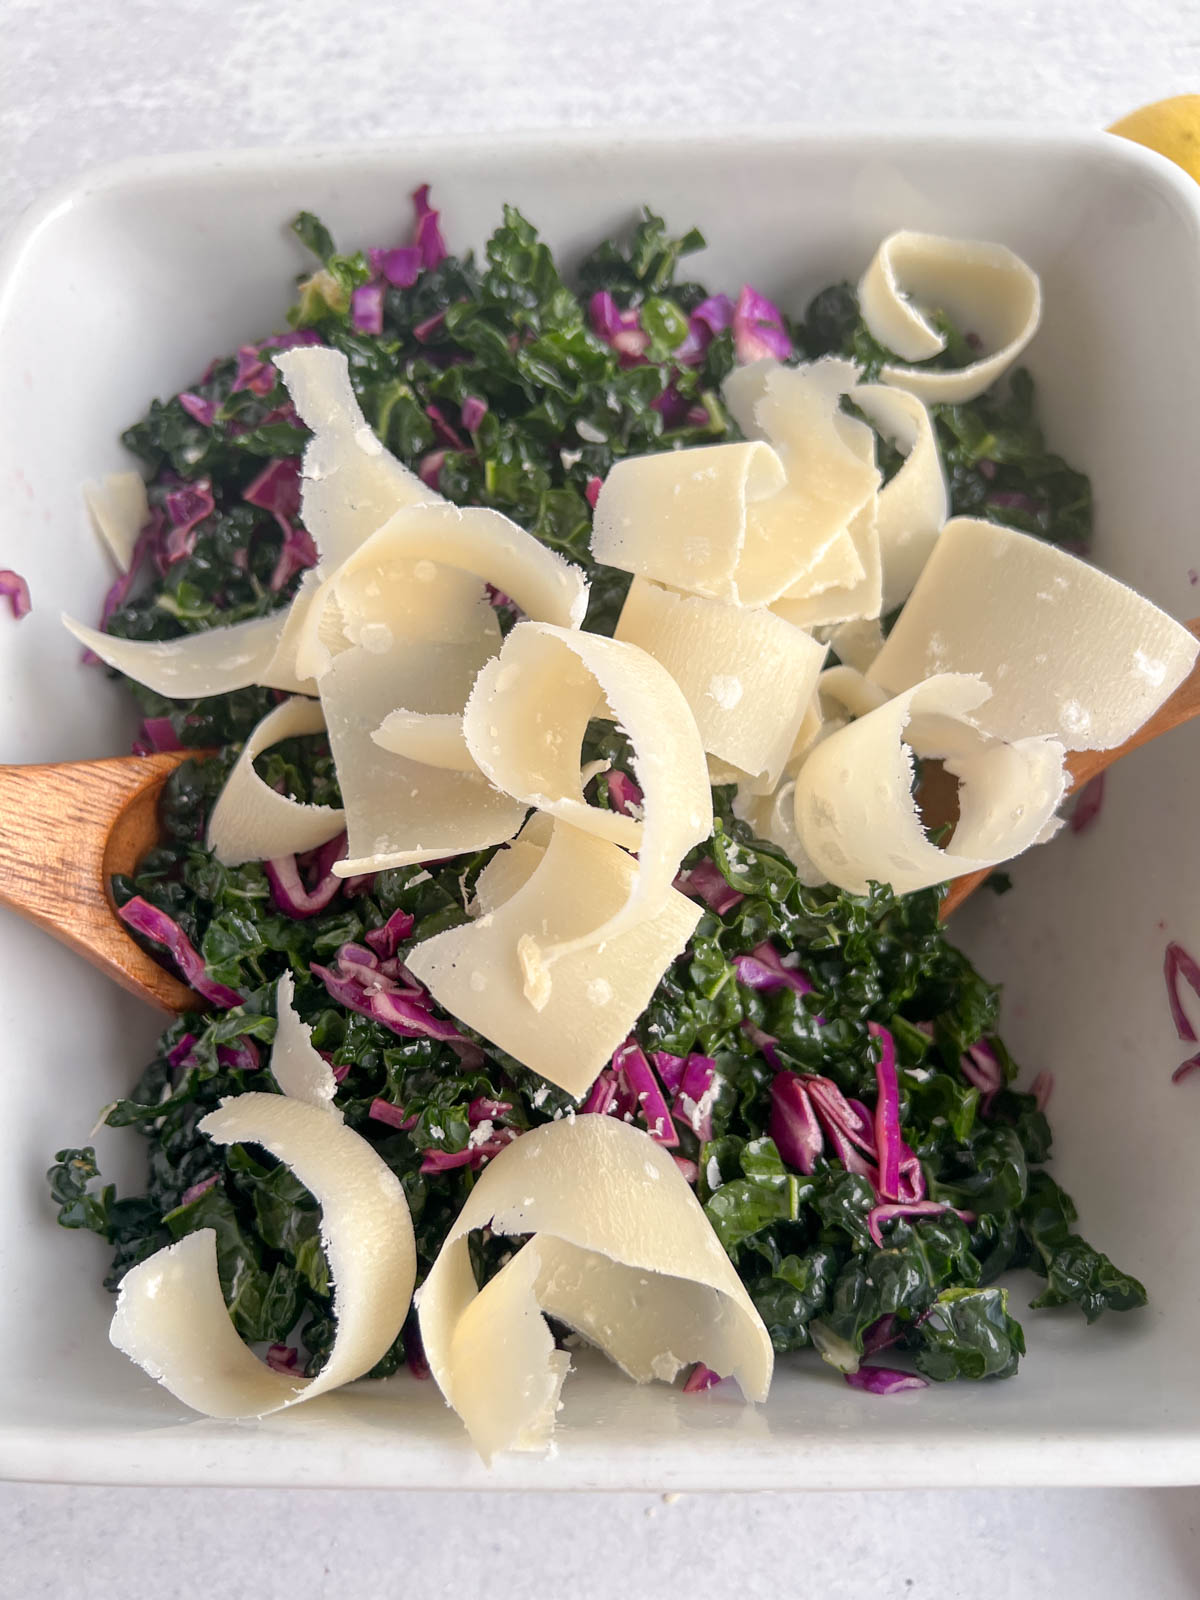 Parmesan shavings on kale and red cabbage in a white bowl 